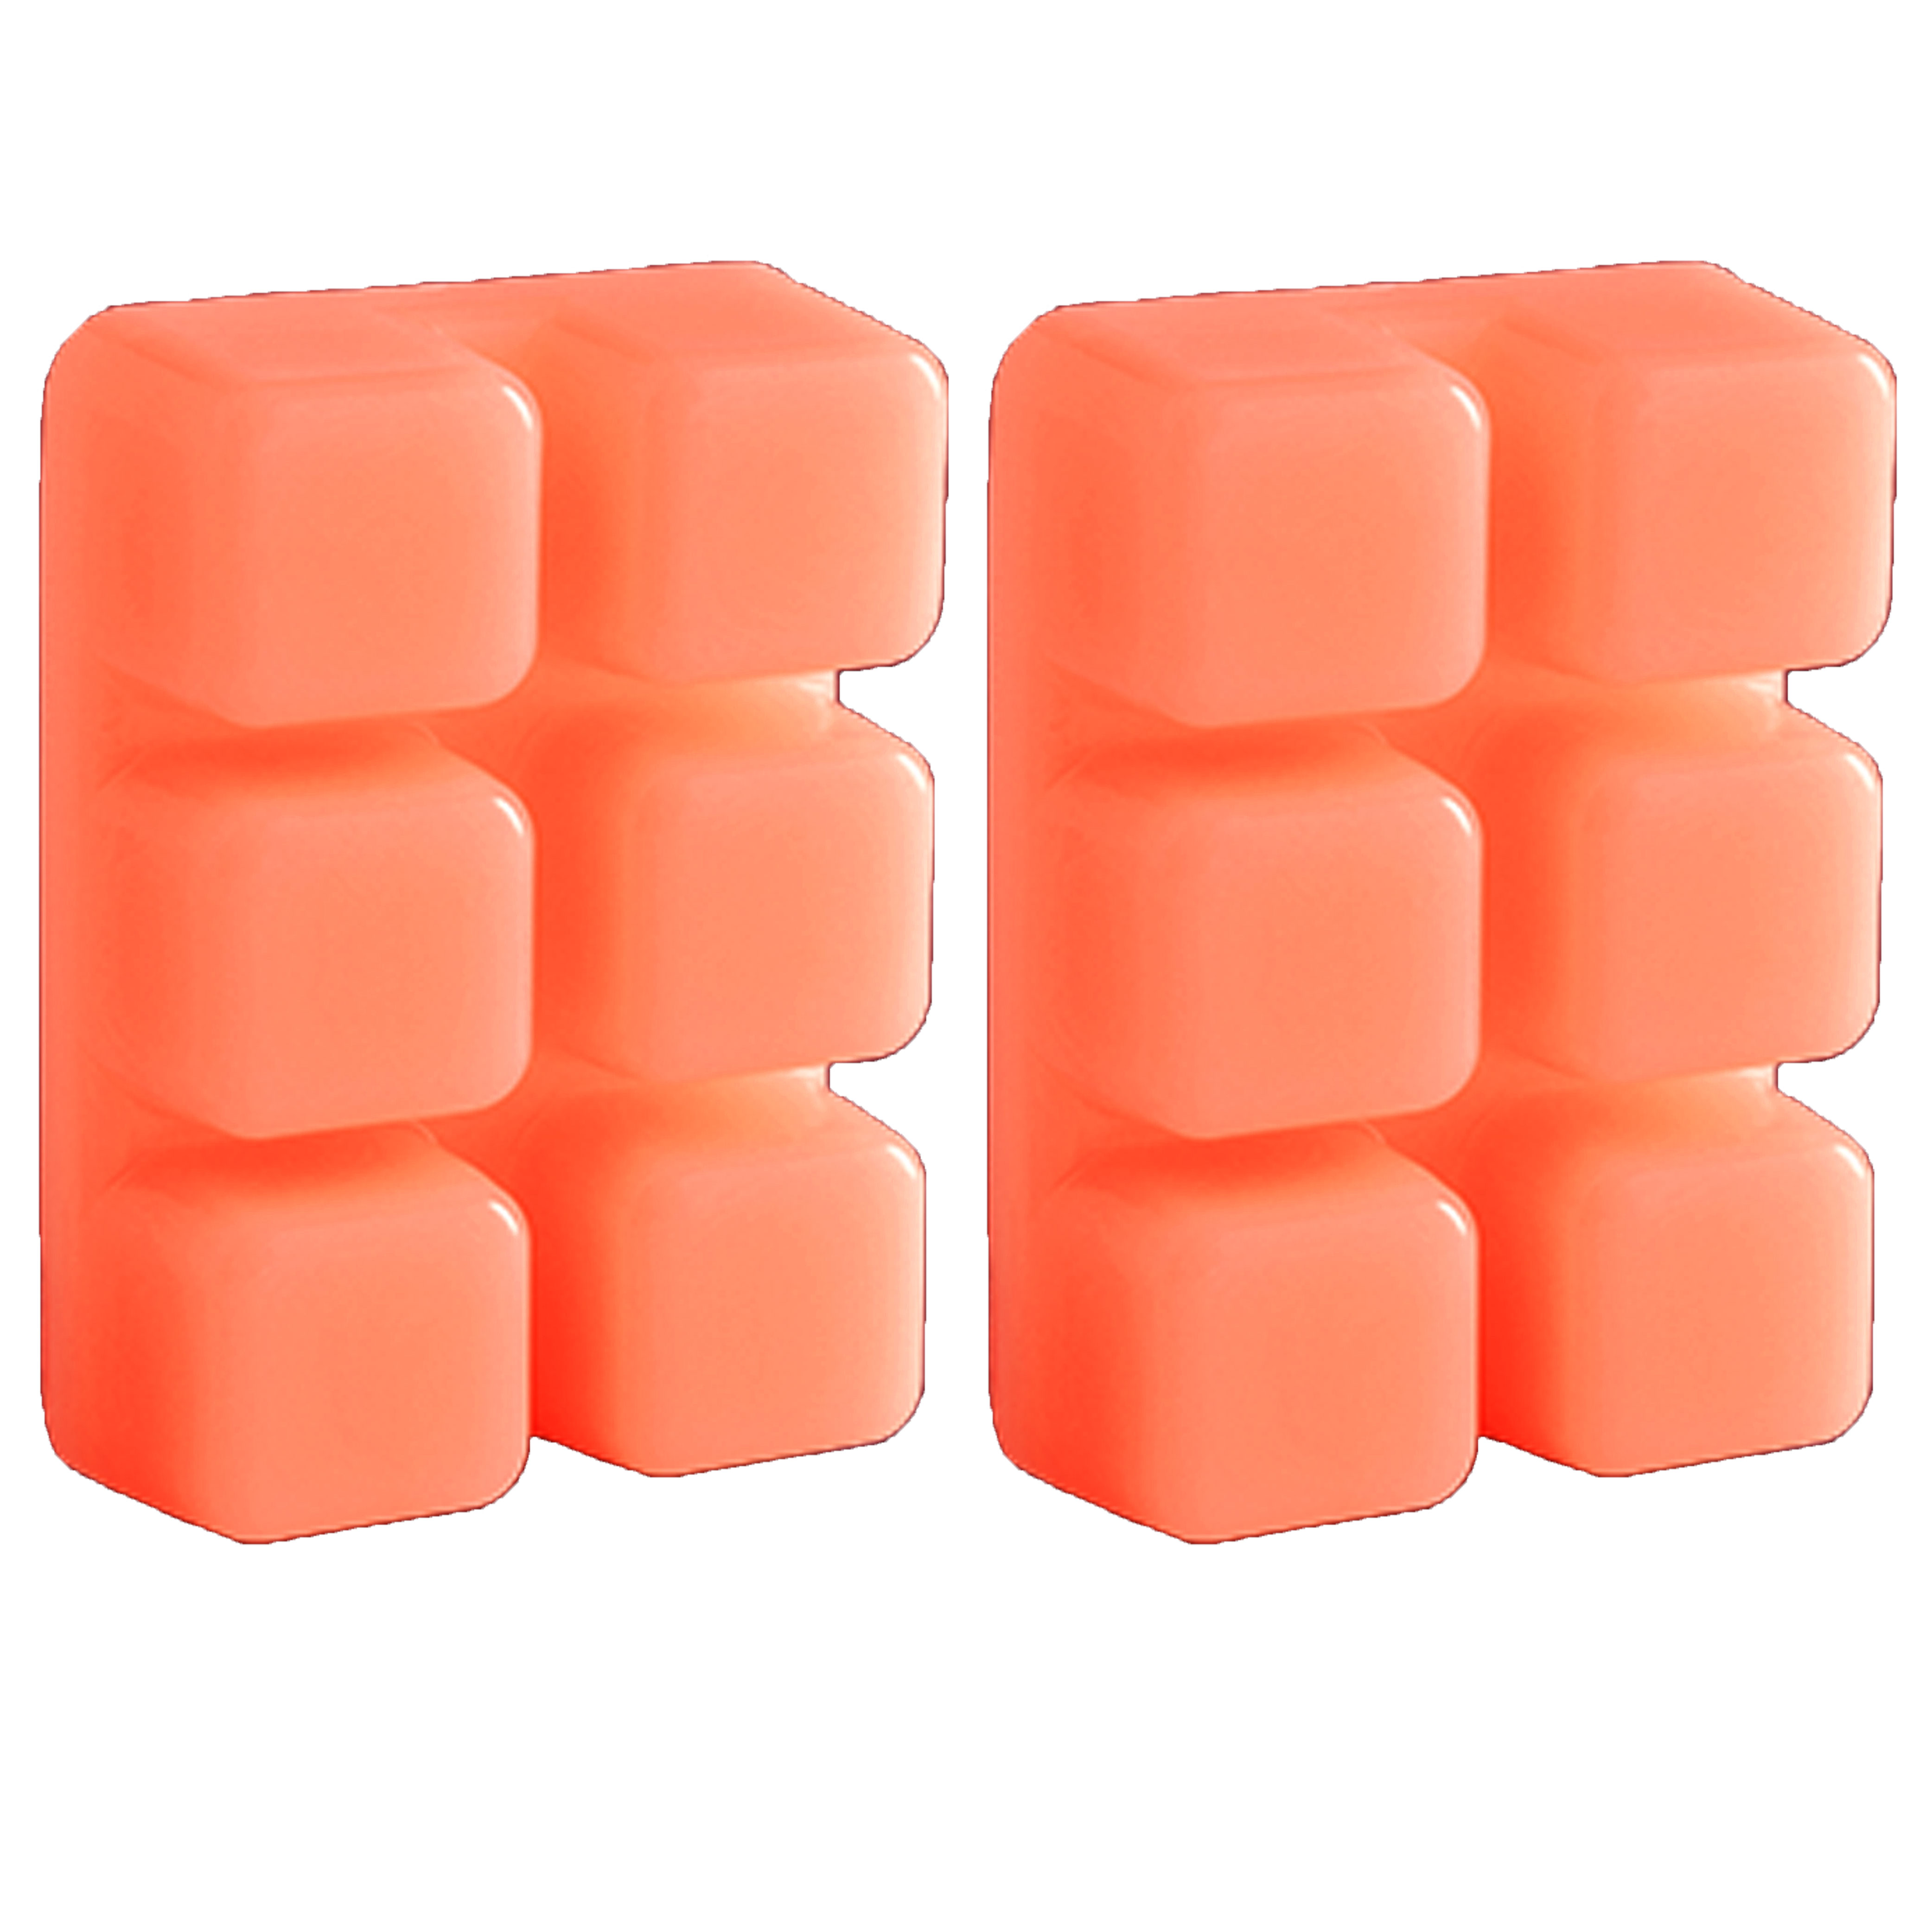 Energize 2.5 oz Orange Aromatherapy Wax Melts by Candle Warmers at Fleet  Farm